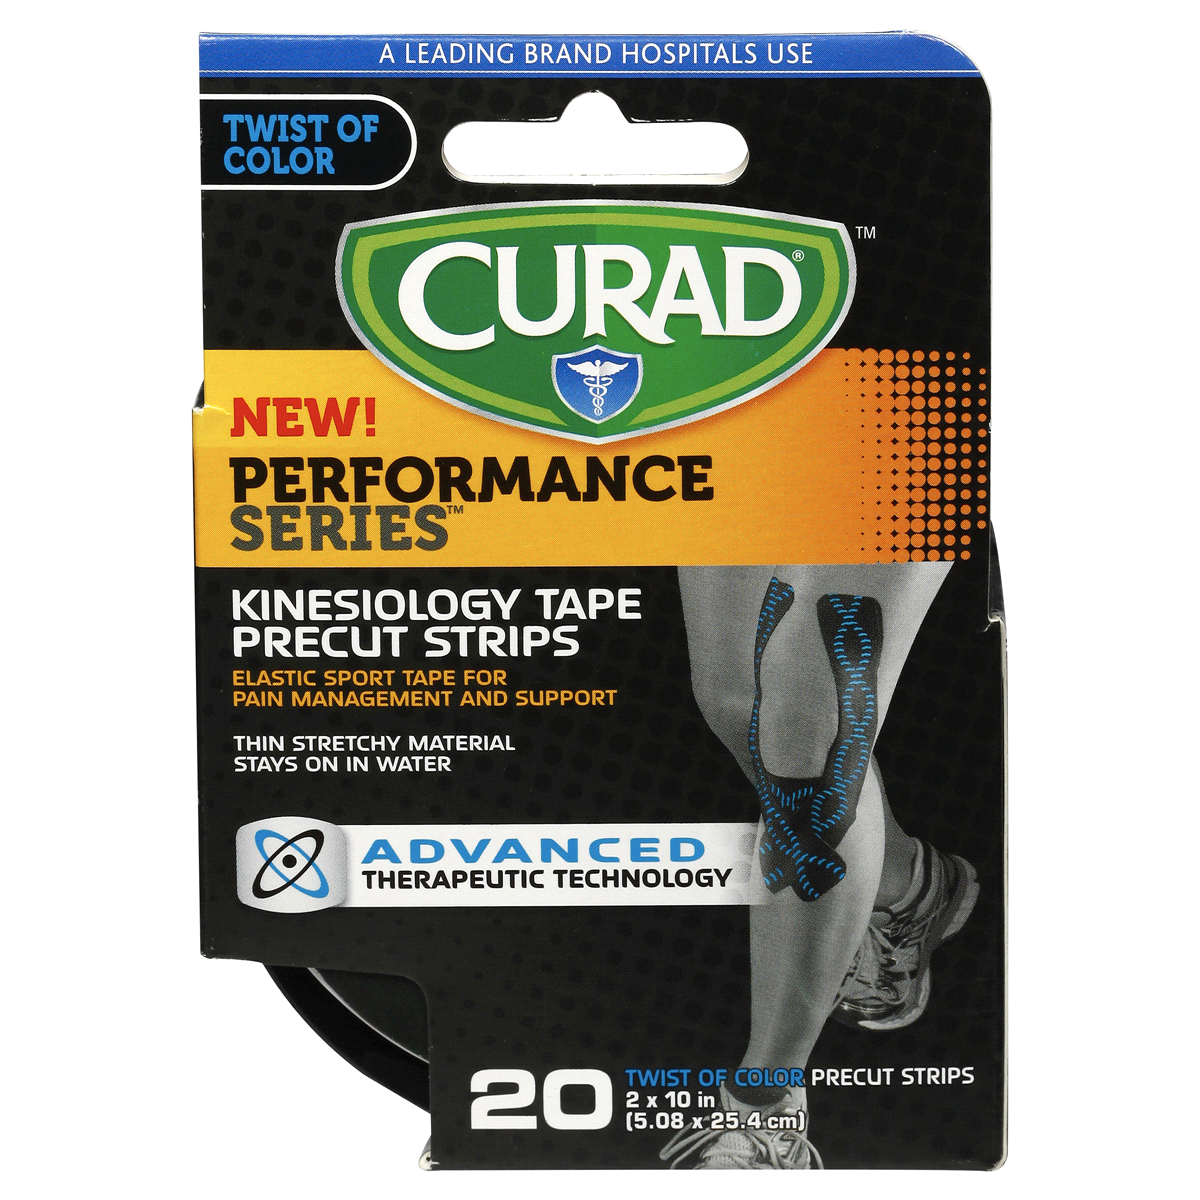 slide 7 of 7, Curad Kinesiology Tape Precut Strips, Twist of Color, 20 ct